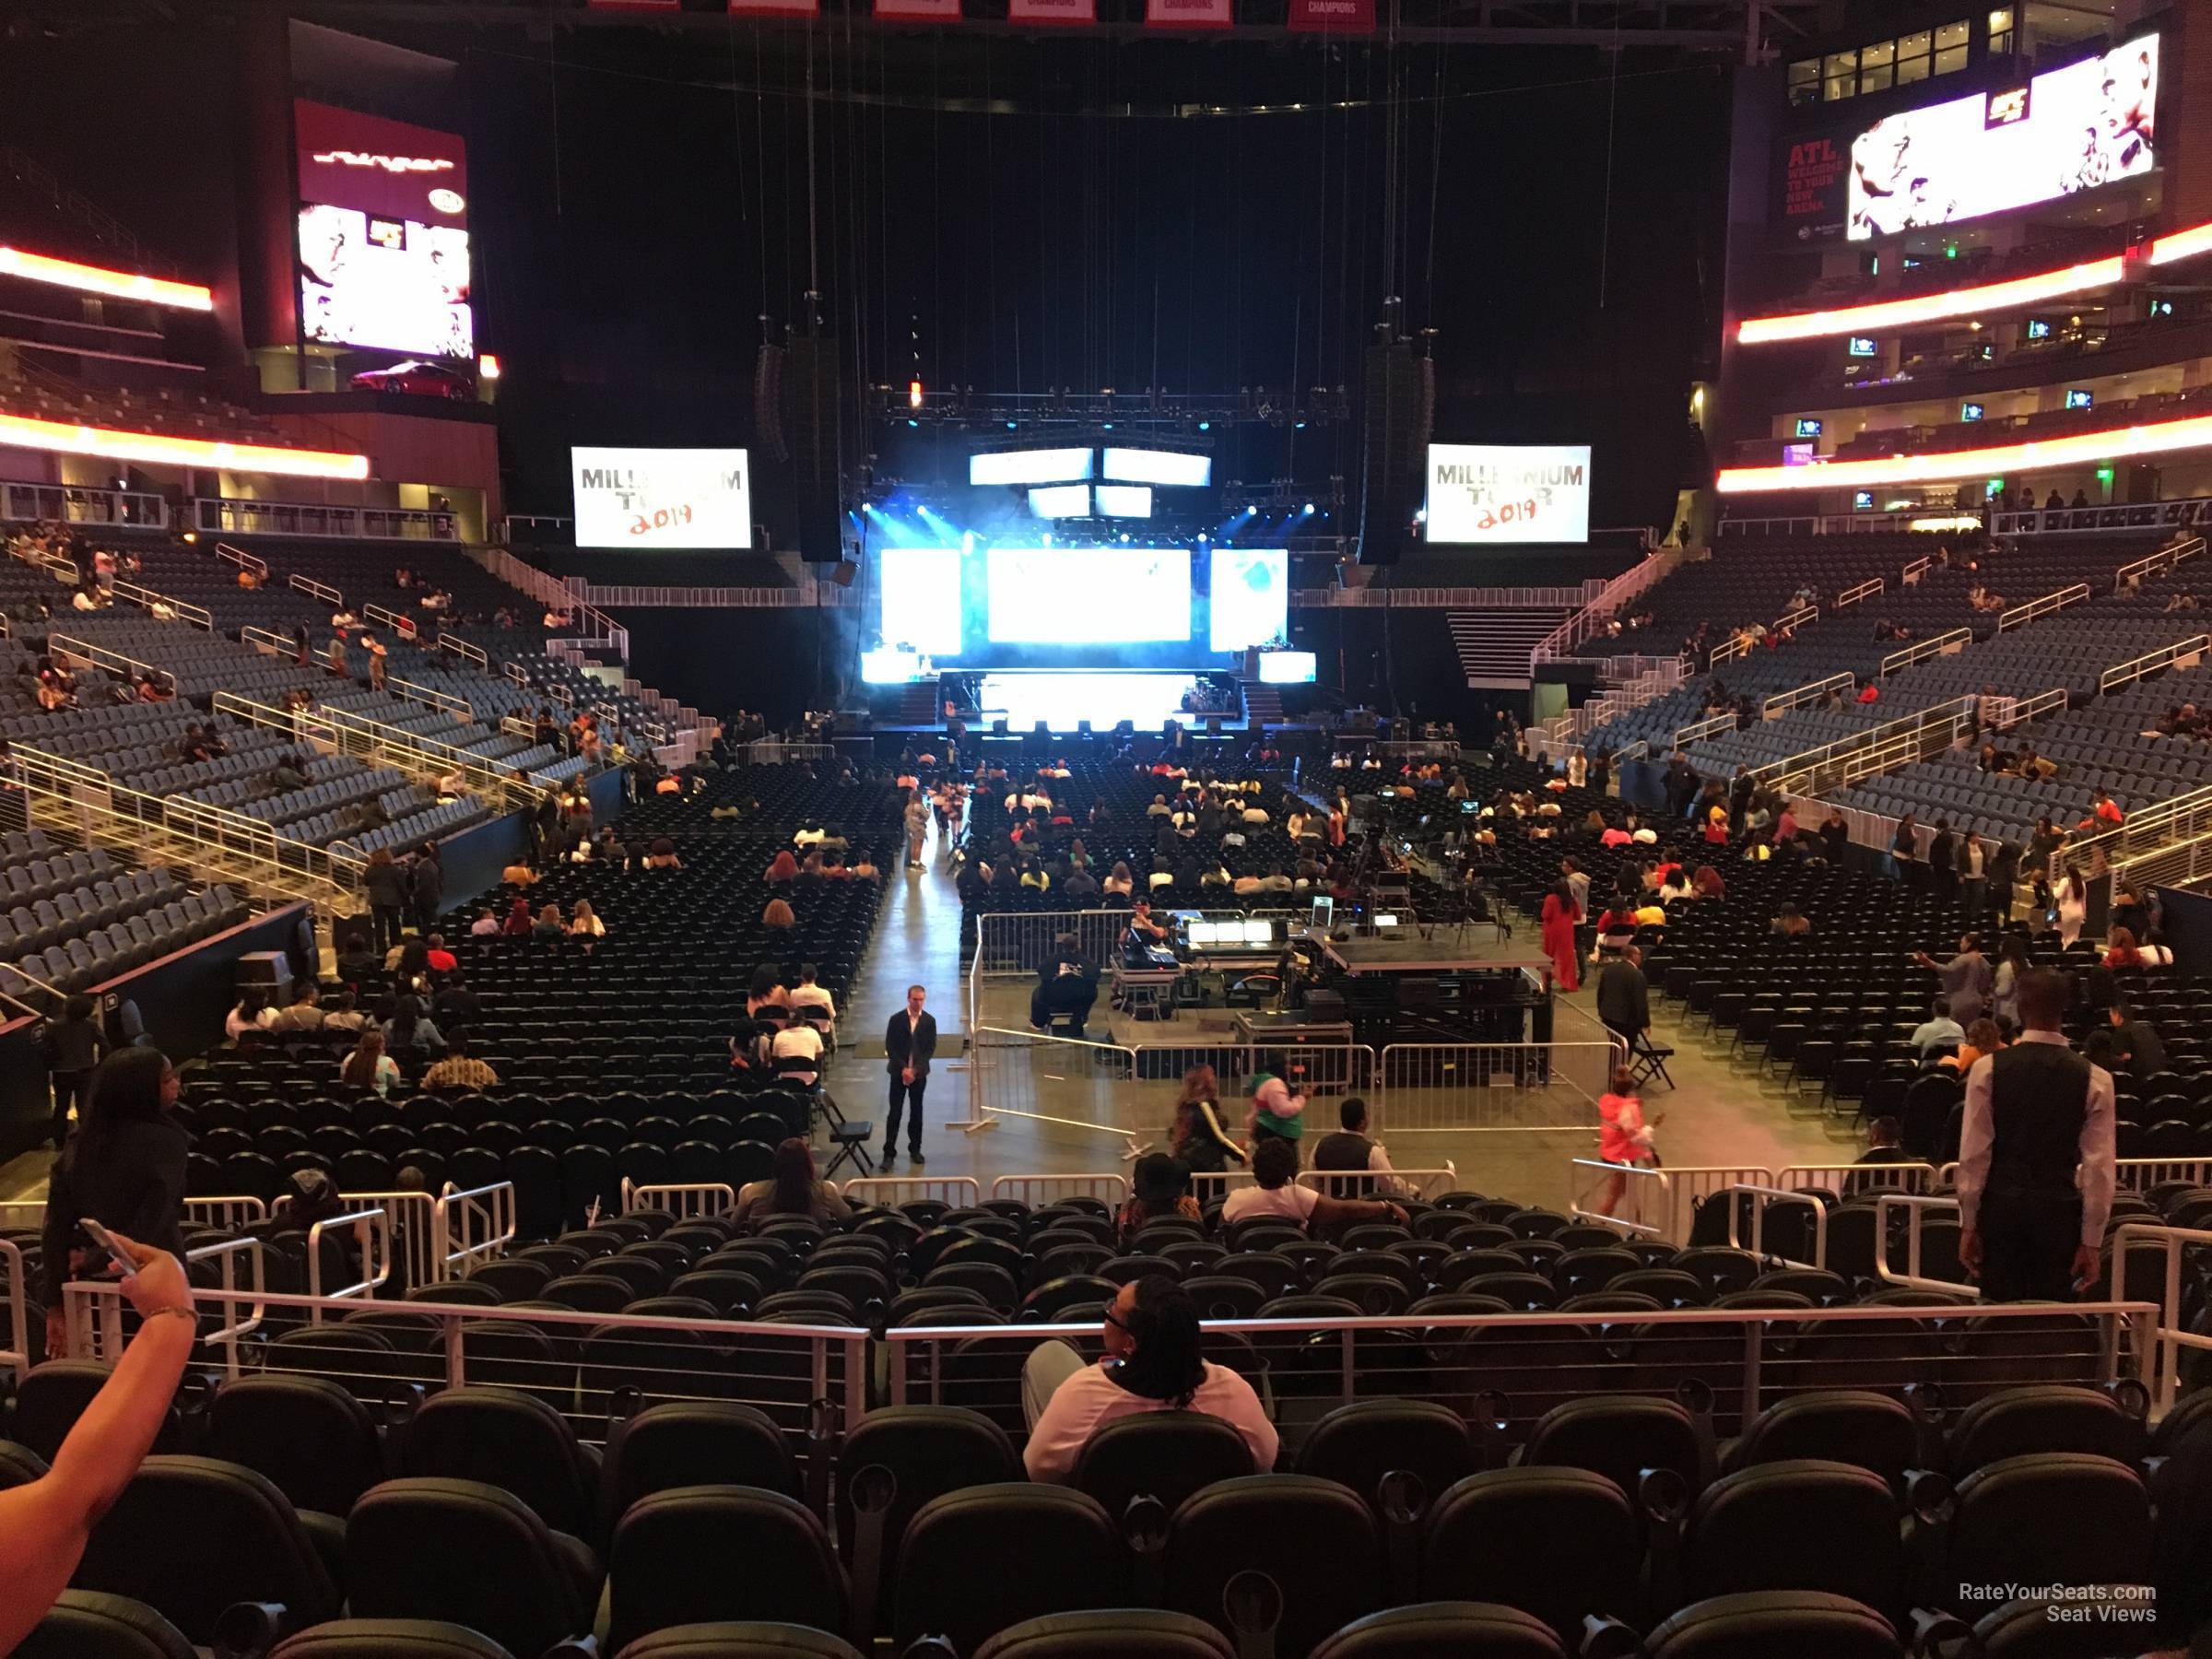 State Farm Arena Section 114 Concert Seating - RateYourSeats.com